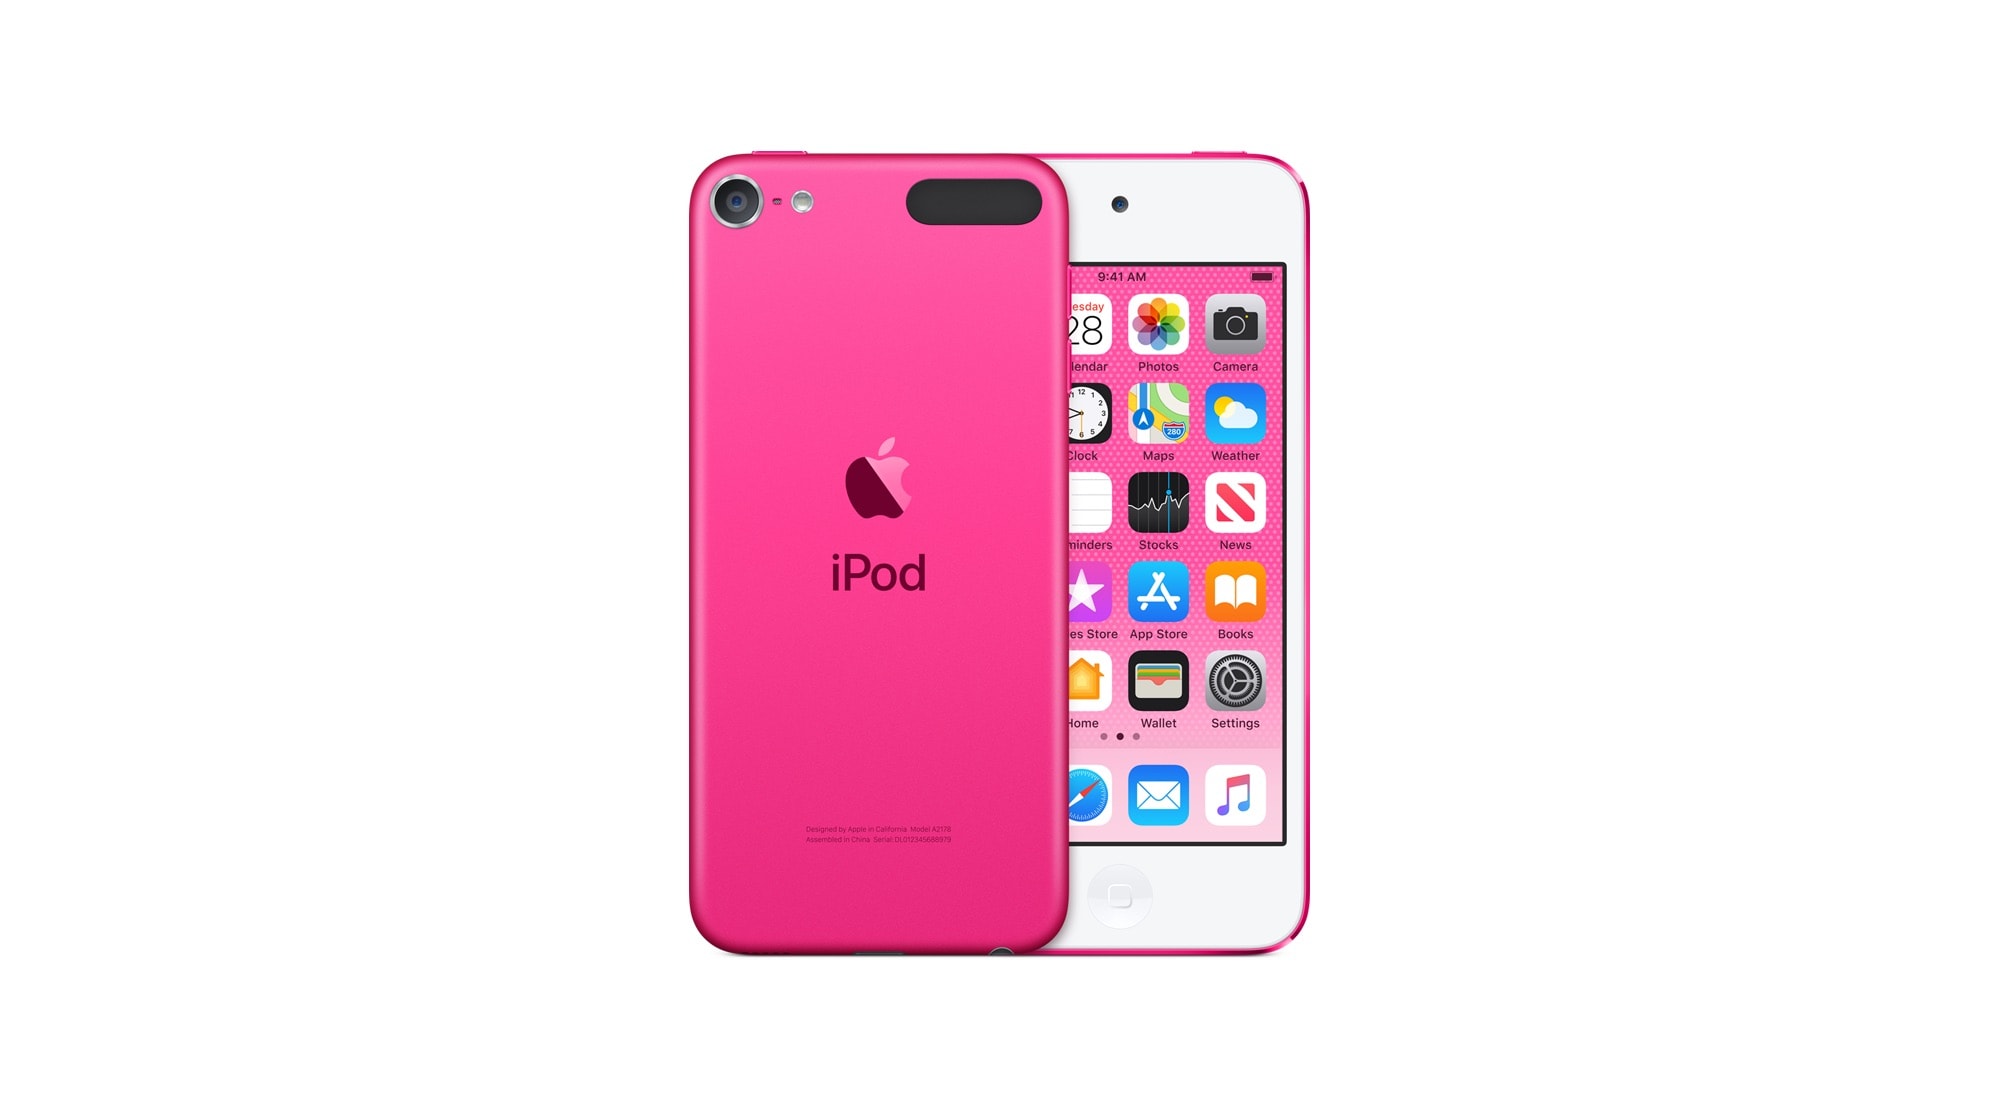 It has a headphone jack, and it comes in pink. What's not to love?